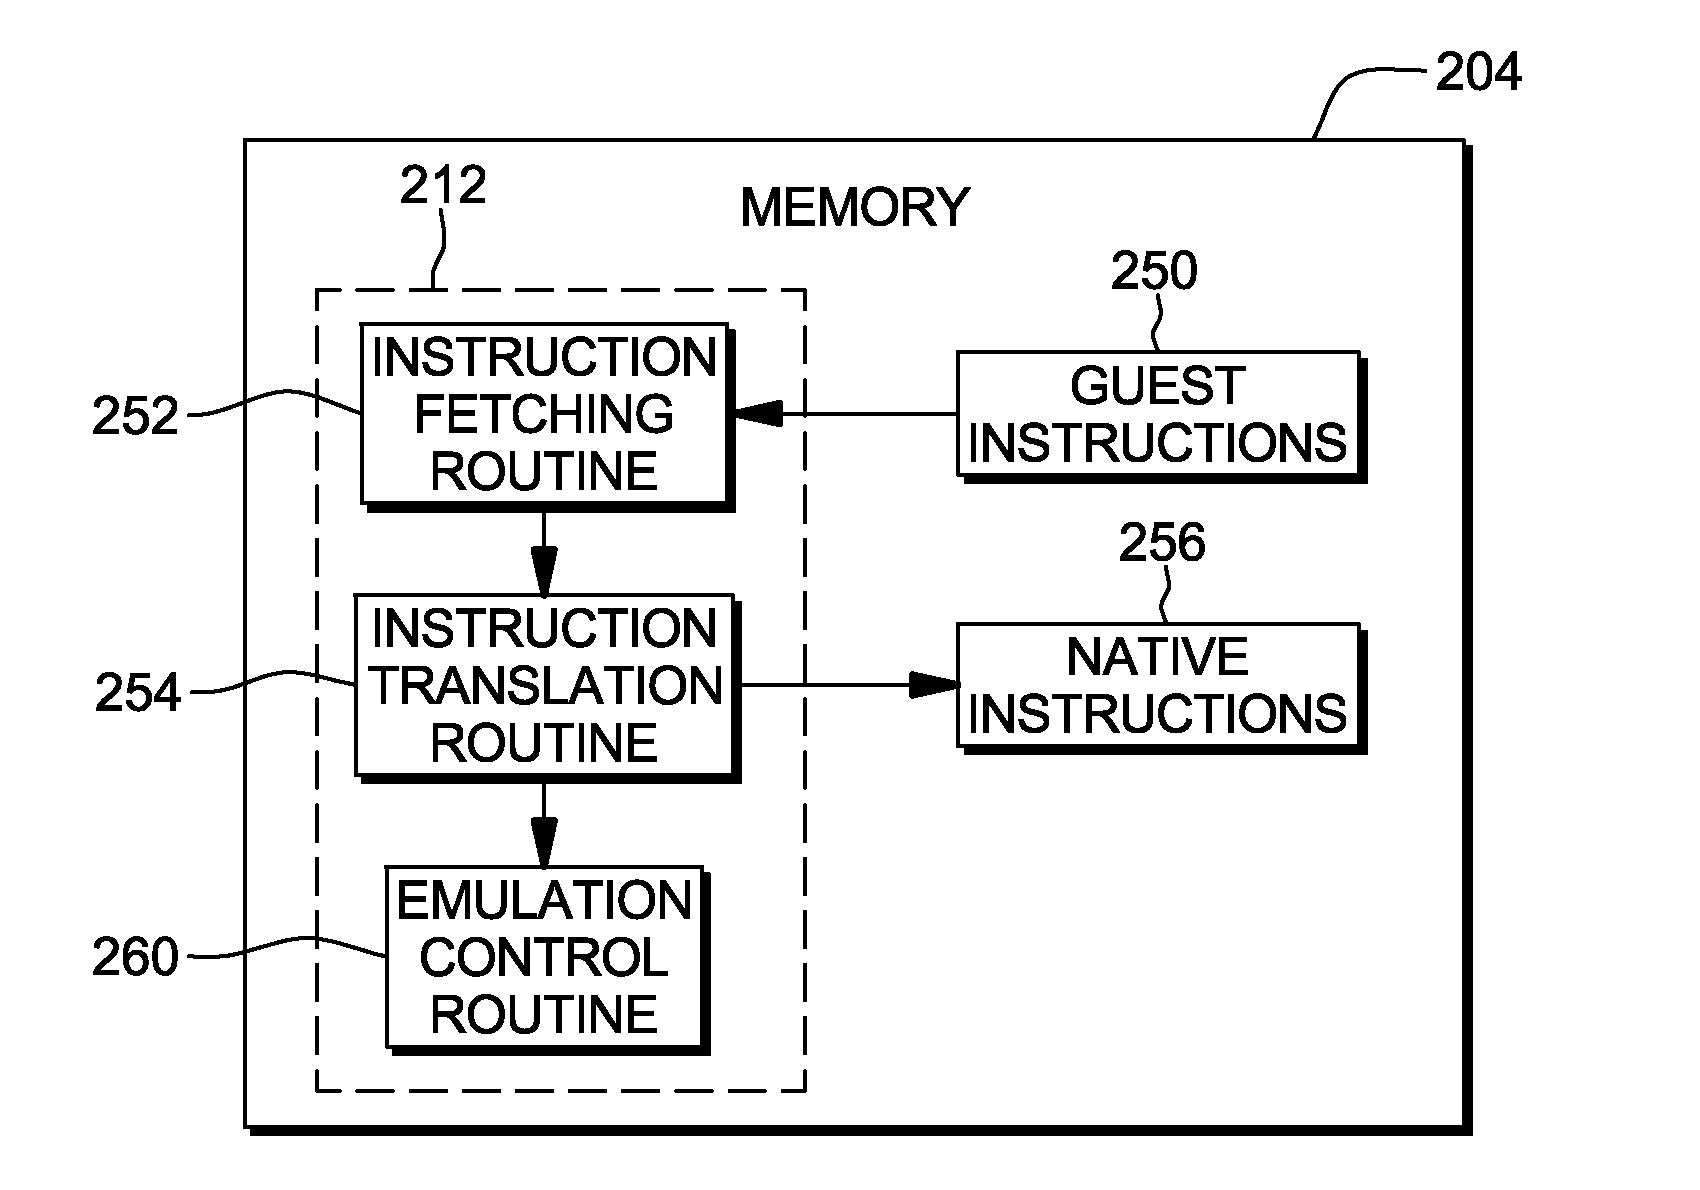 Instruction to compute the distance to a specified memory boundary